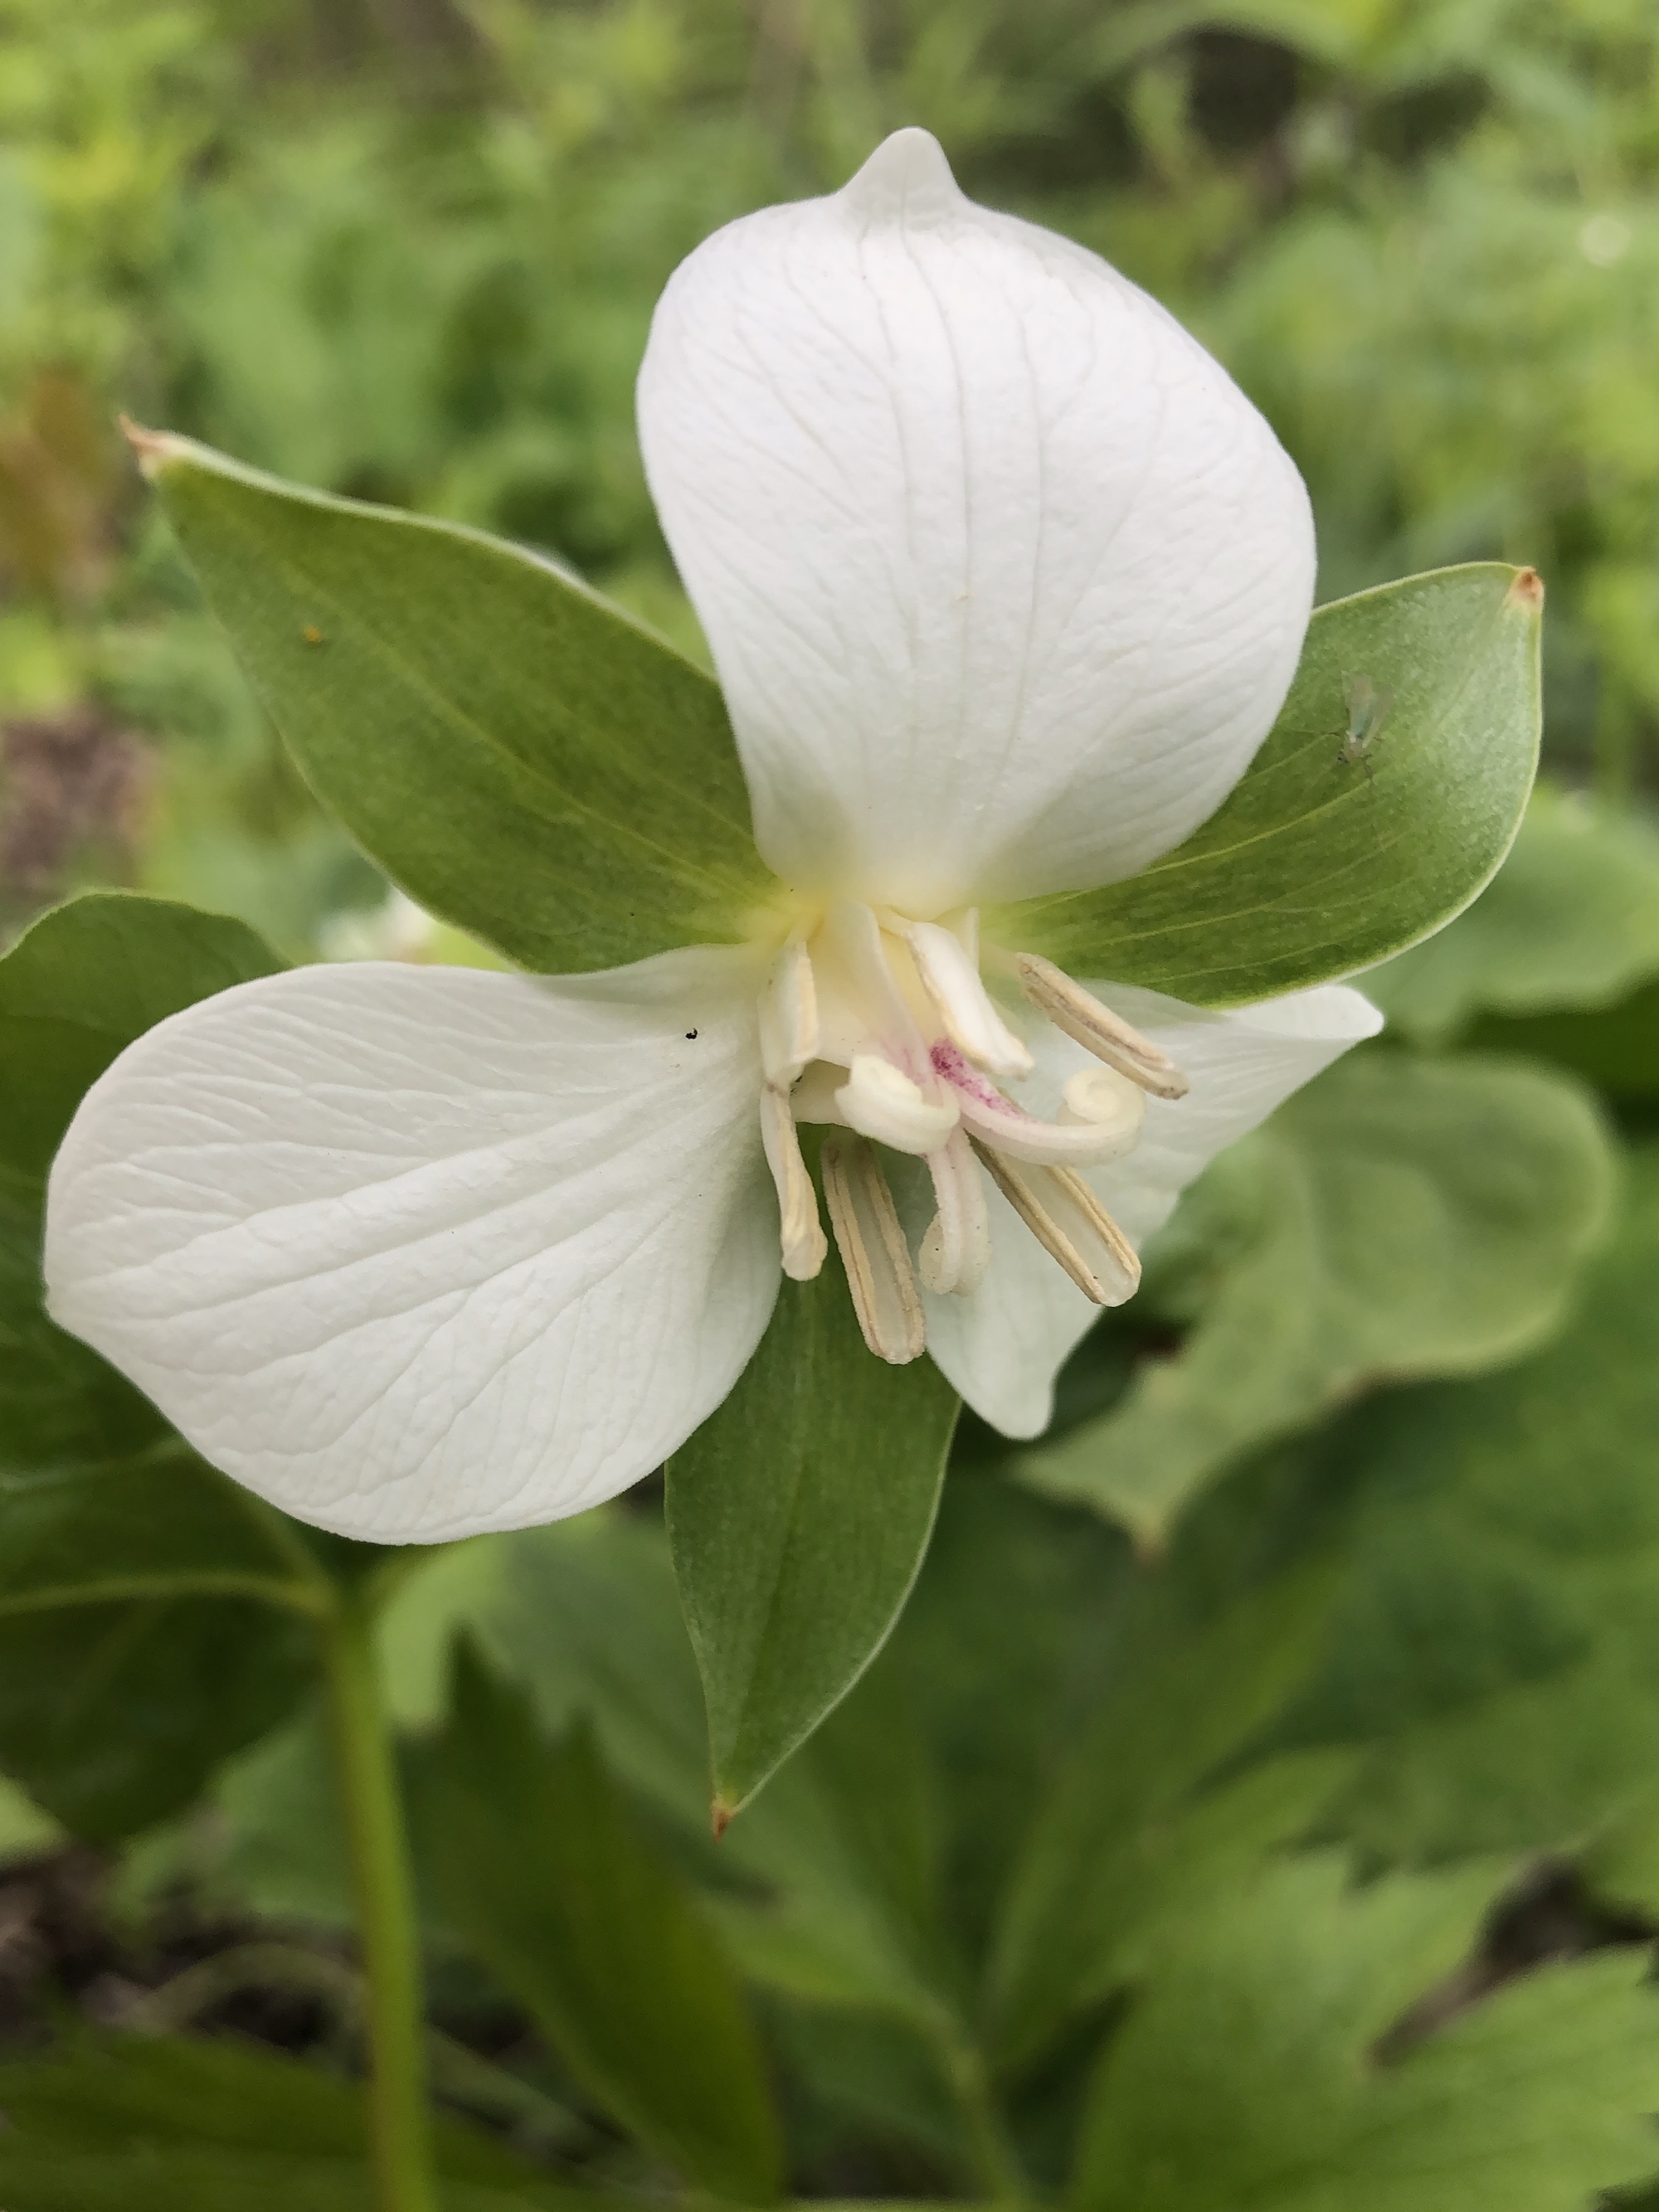 Drooping Trillium near Council Ring in Oak Savanna in Madison, Wisconsin on May 10, 2021.